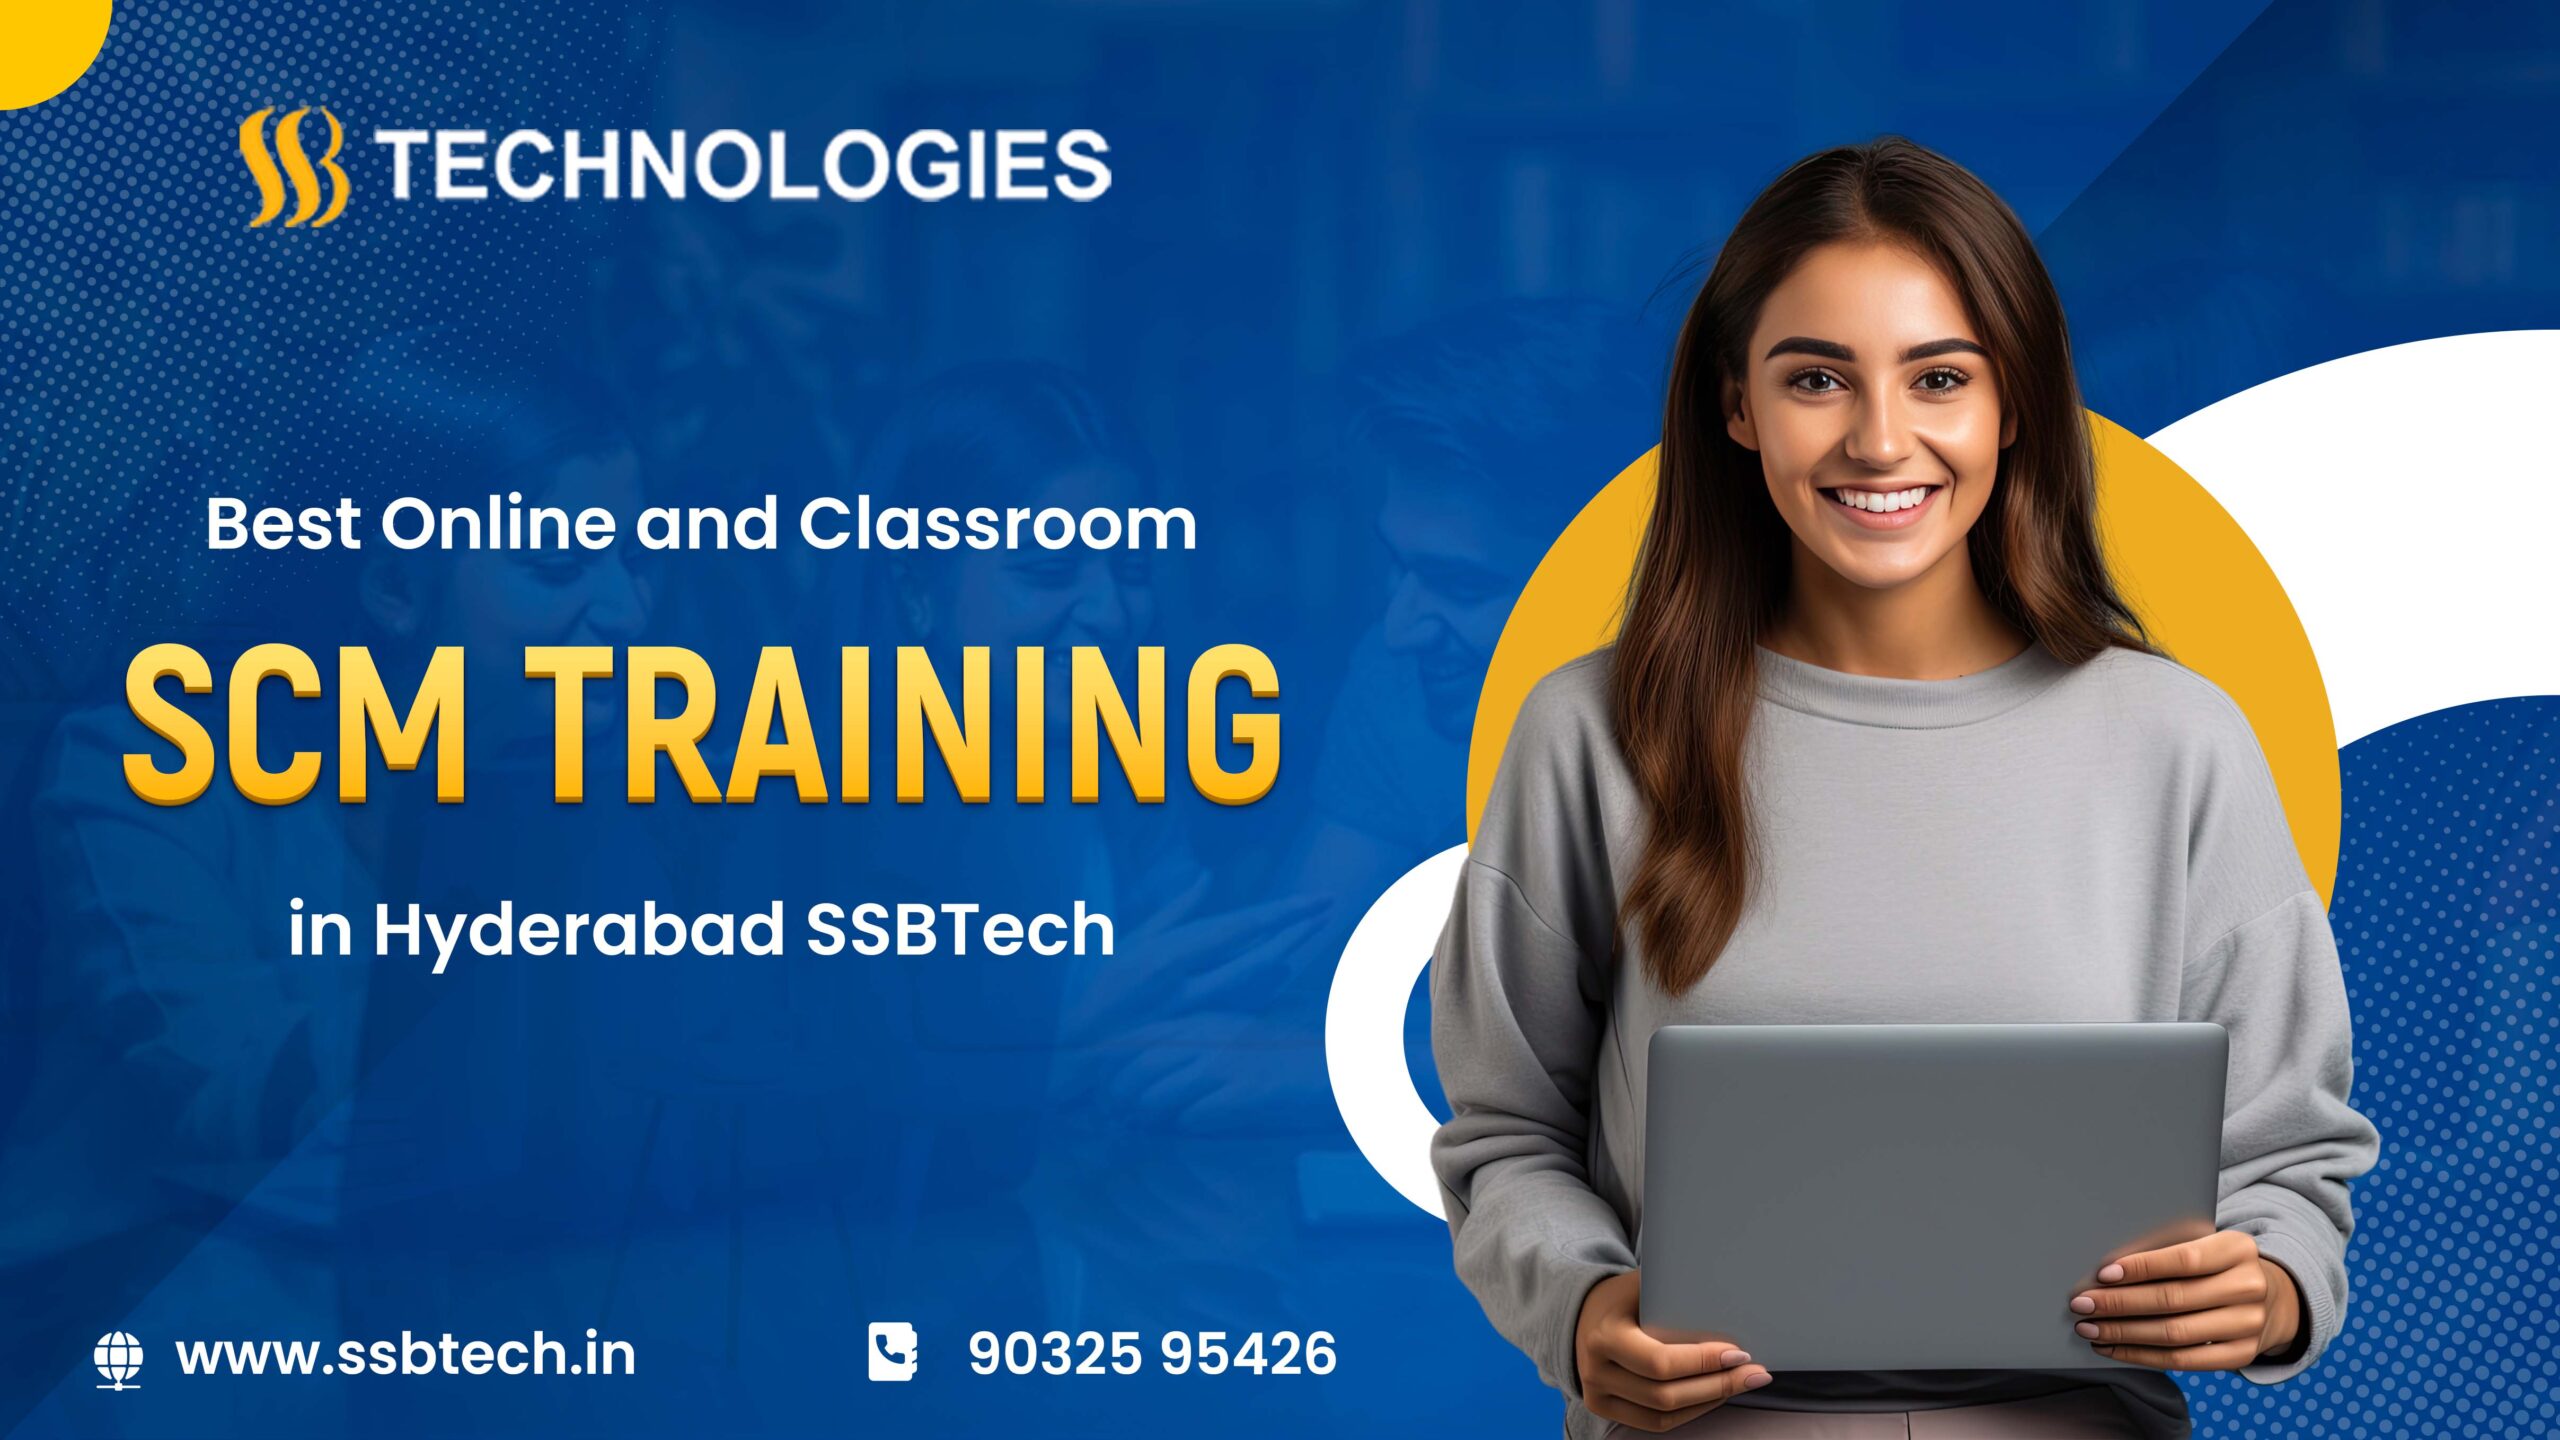 Best Online and Classroom SCM Training in Hyderabad: SSBTech